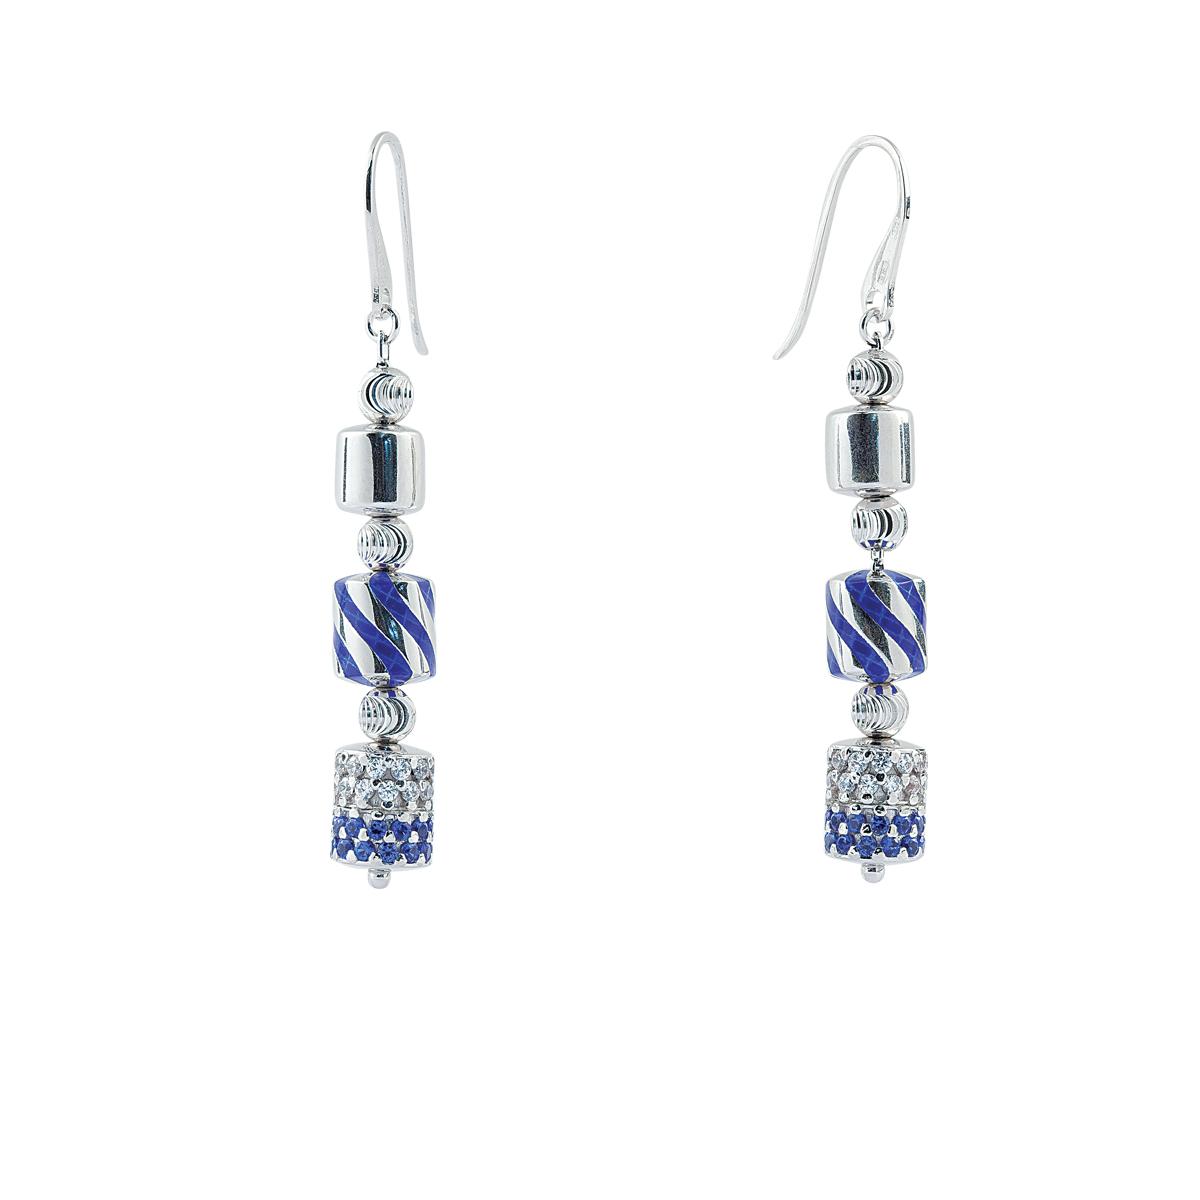 Earrings in 925 rhodium-plated silver and hand-made enamelling, with cubic zirconia pavé element - ZOR1059-MB